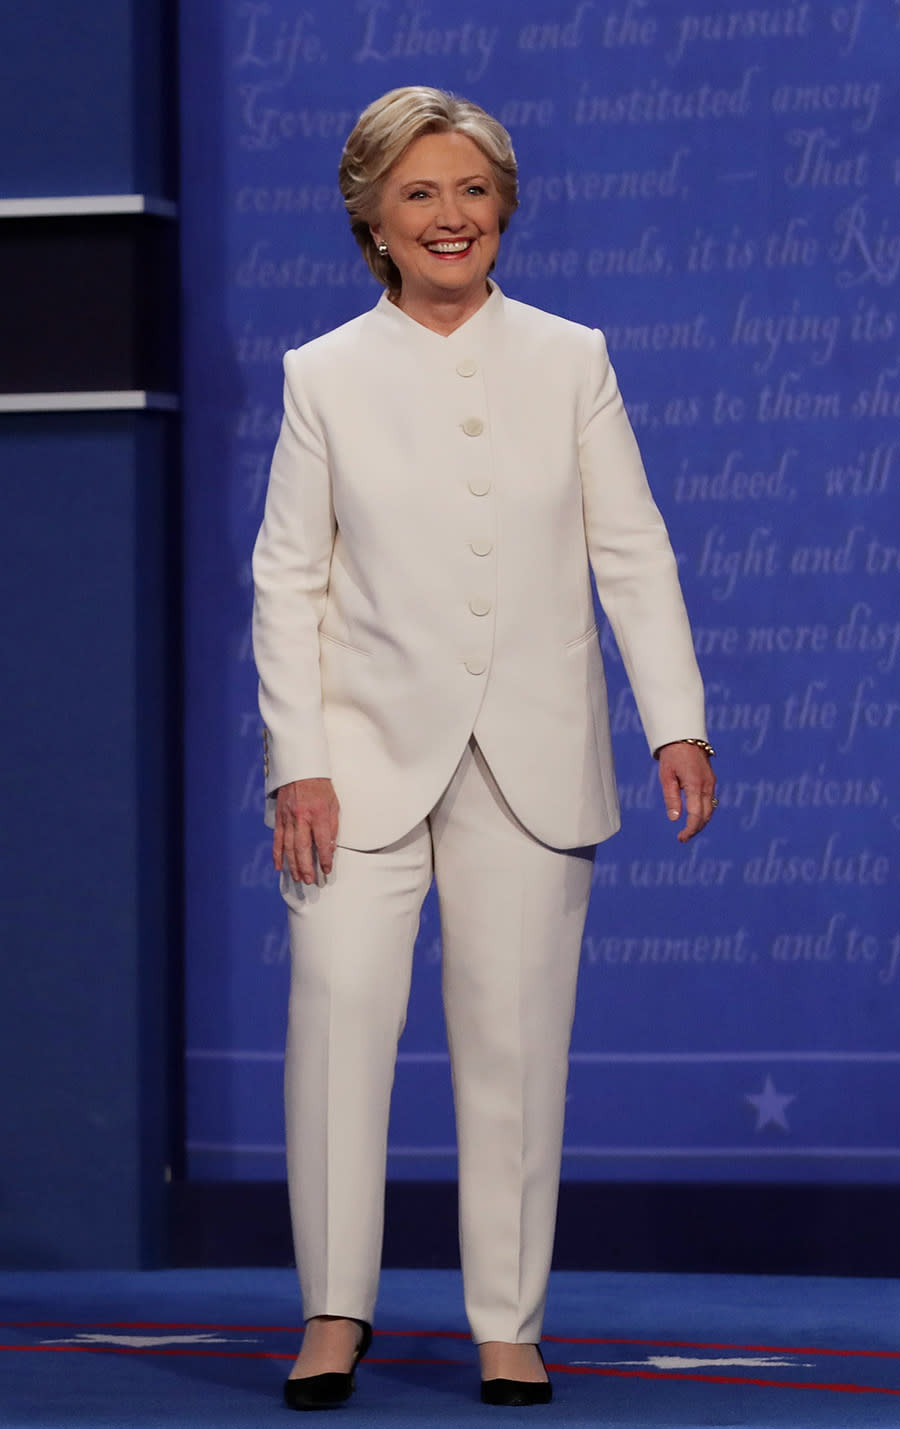 The Most Amazing White Suit Moments in Fashion History